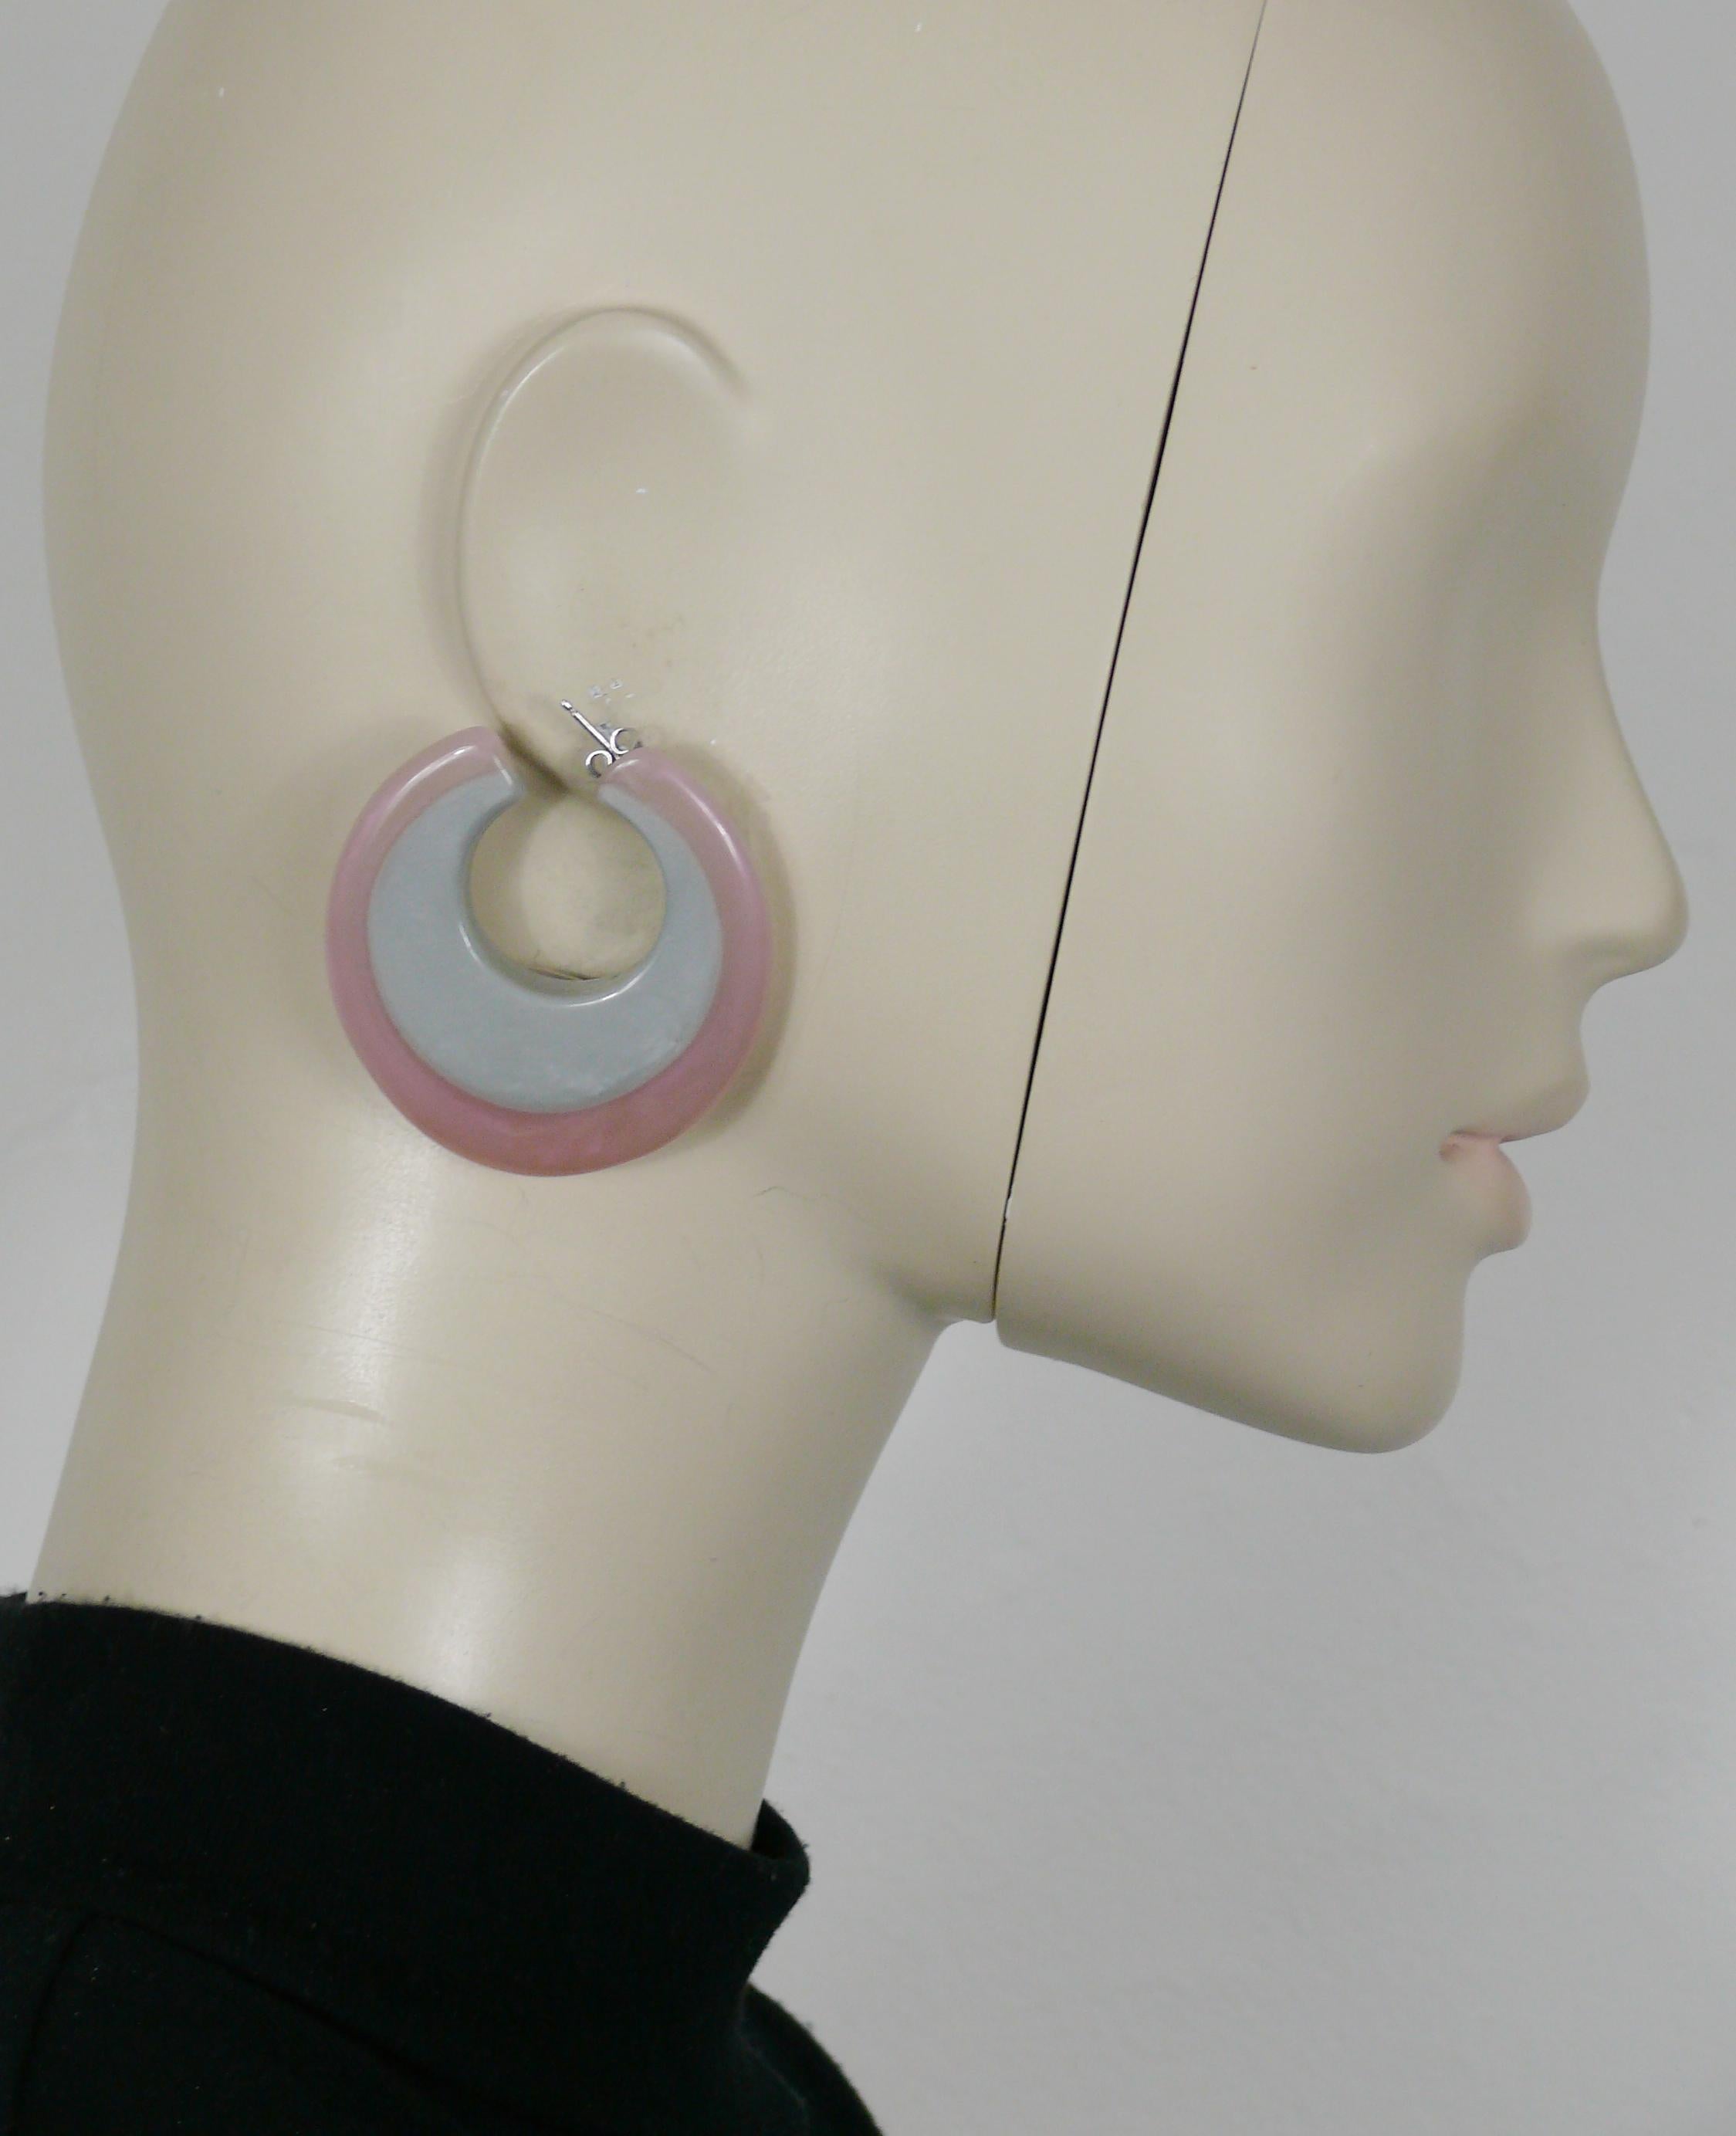 THIERRY MUGLER vintage pearly grey and pink resin hoop earrings (for pierced ears).

Embossed TM.

Indicative measurements : height approx. 5.4 cm (2.13 inches) / width approx 5 cm (1.97 inches).

Weight per earring : approx. 10 grams.

Material :